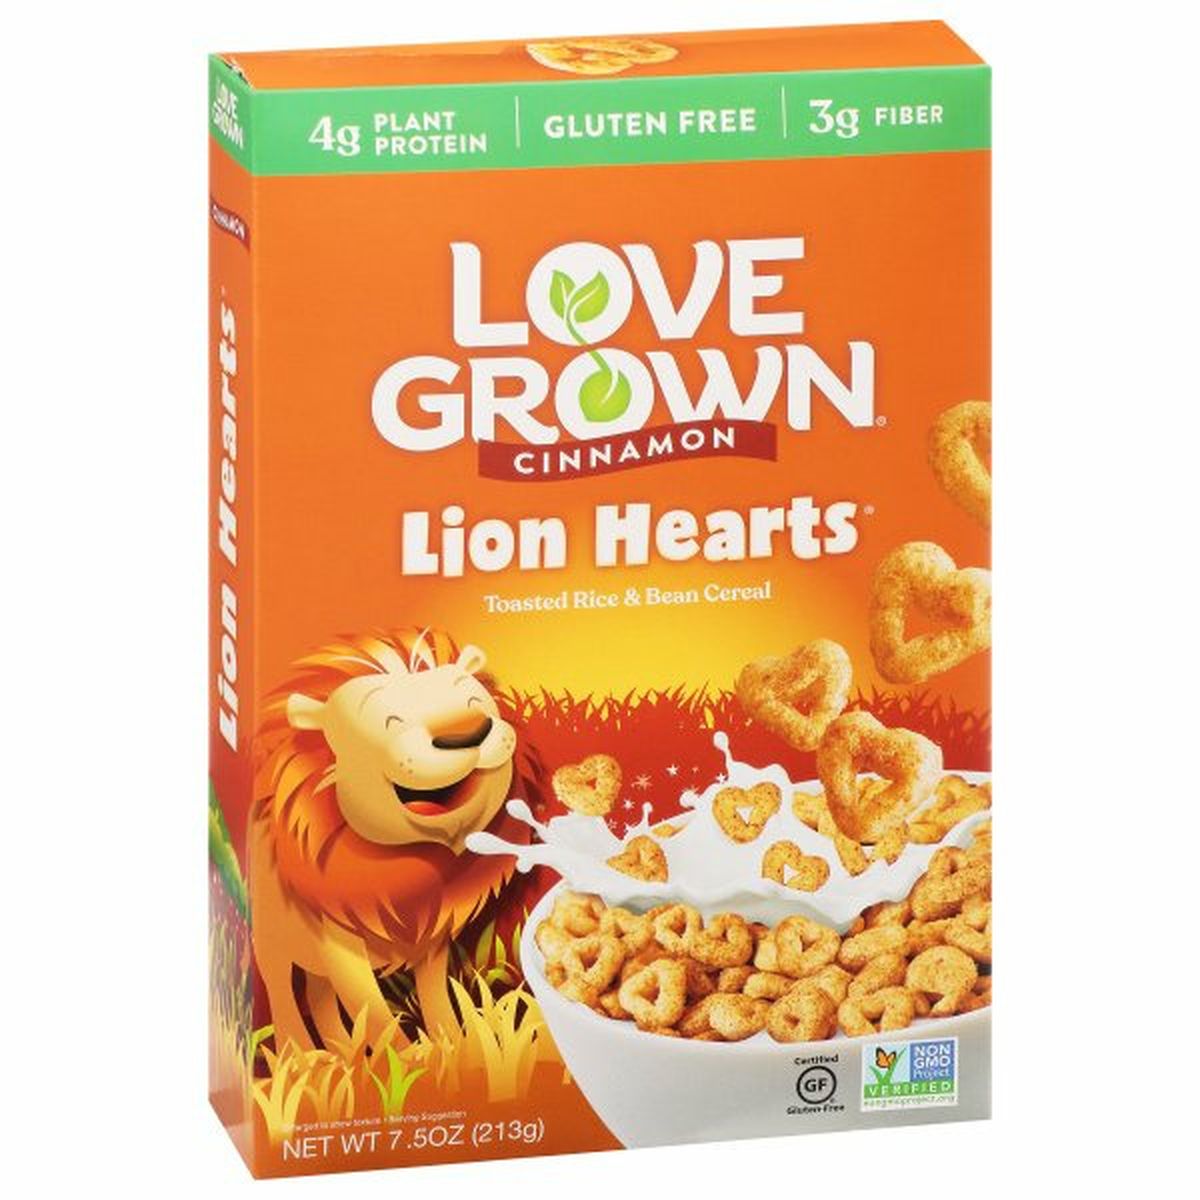 Calories in Love Grown Cereal, Cinnamon, Lion Hearts